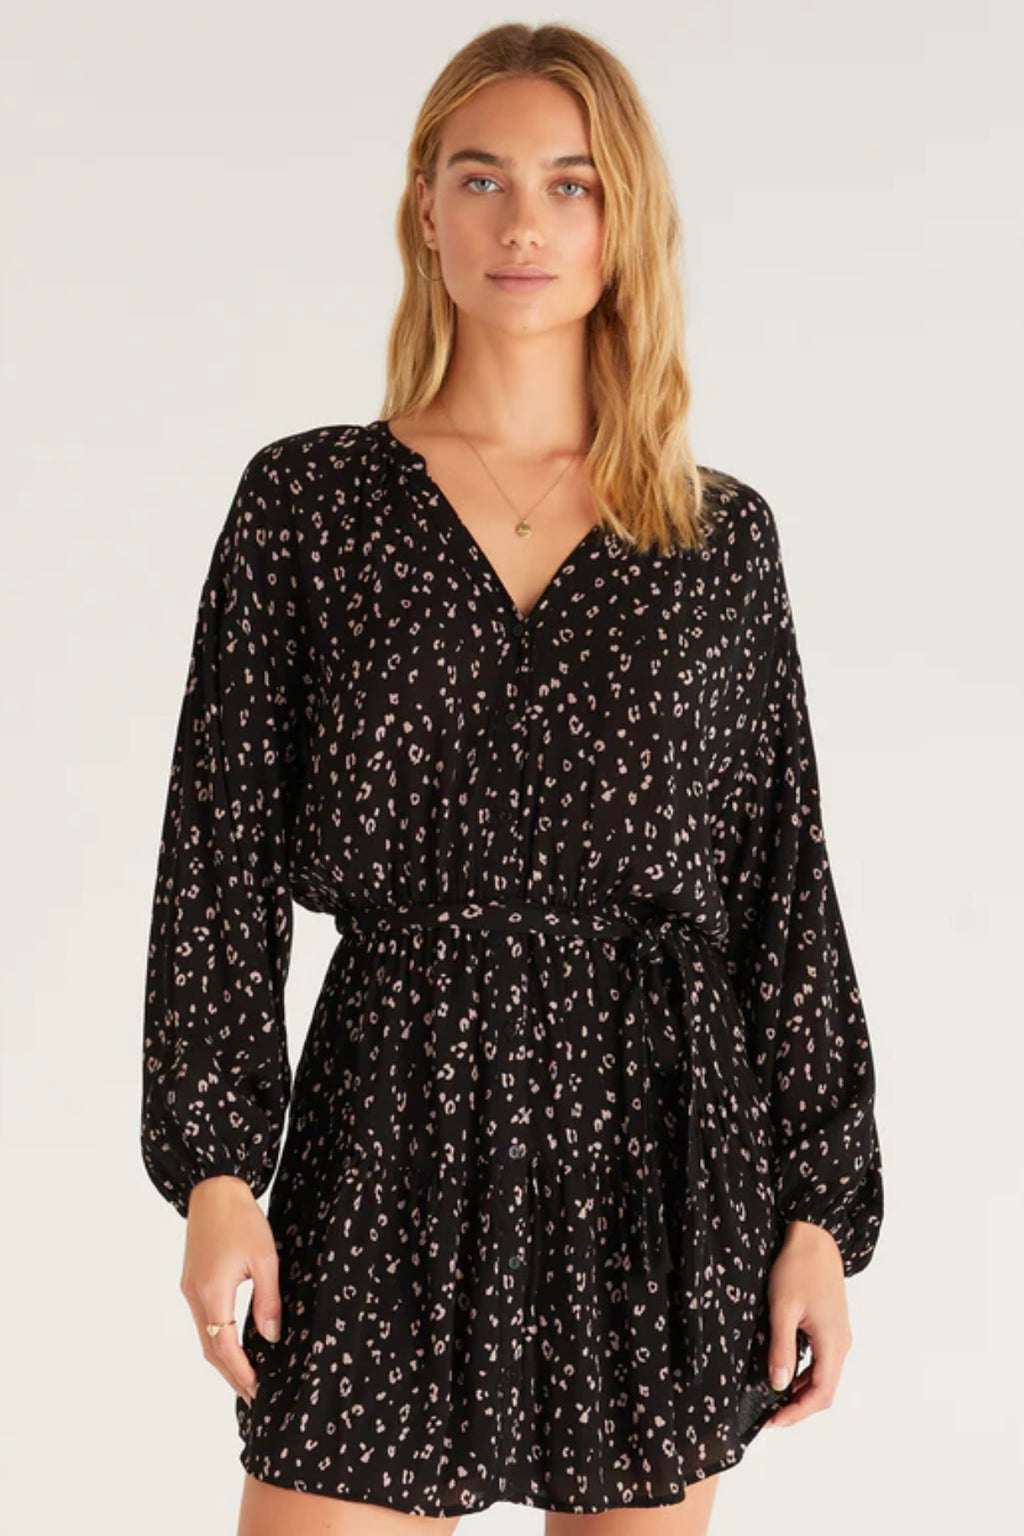 Z SUPPLY </br>Easy to Love Leopard Dress